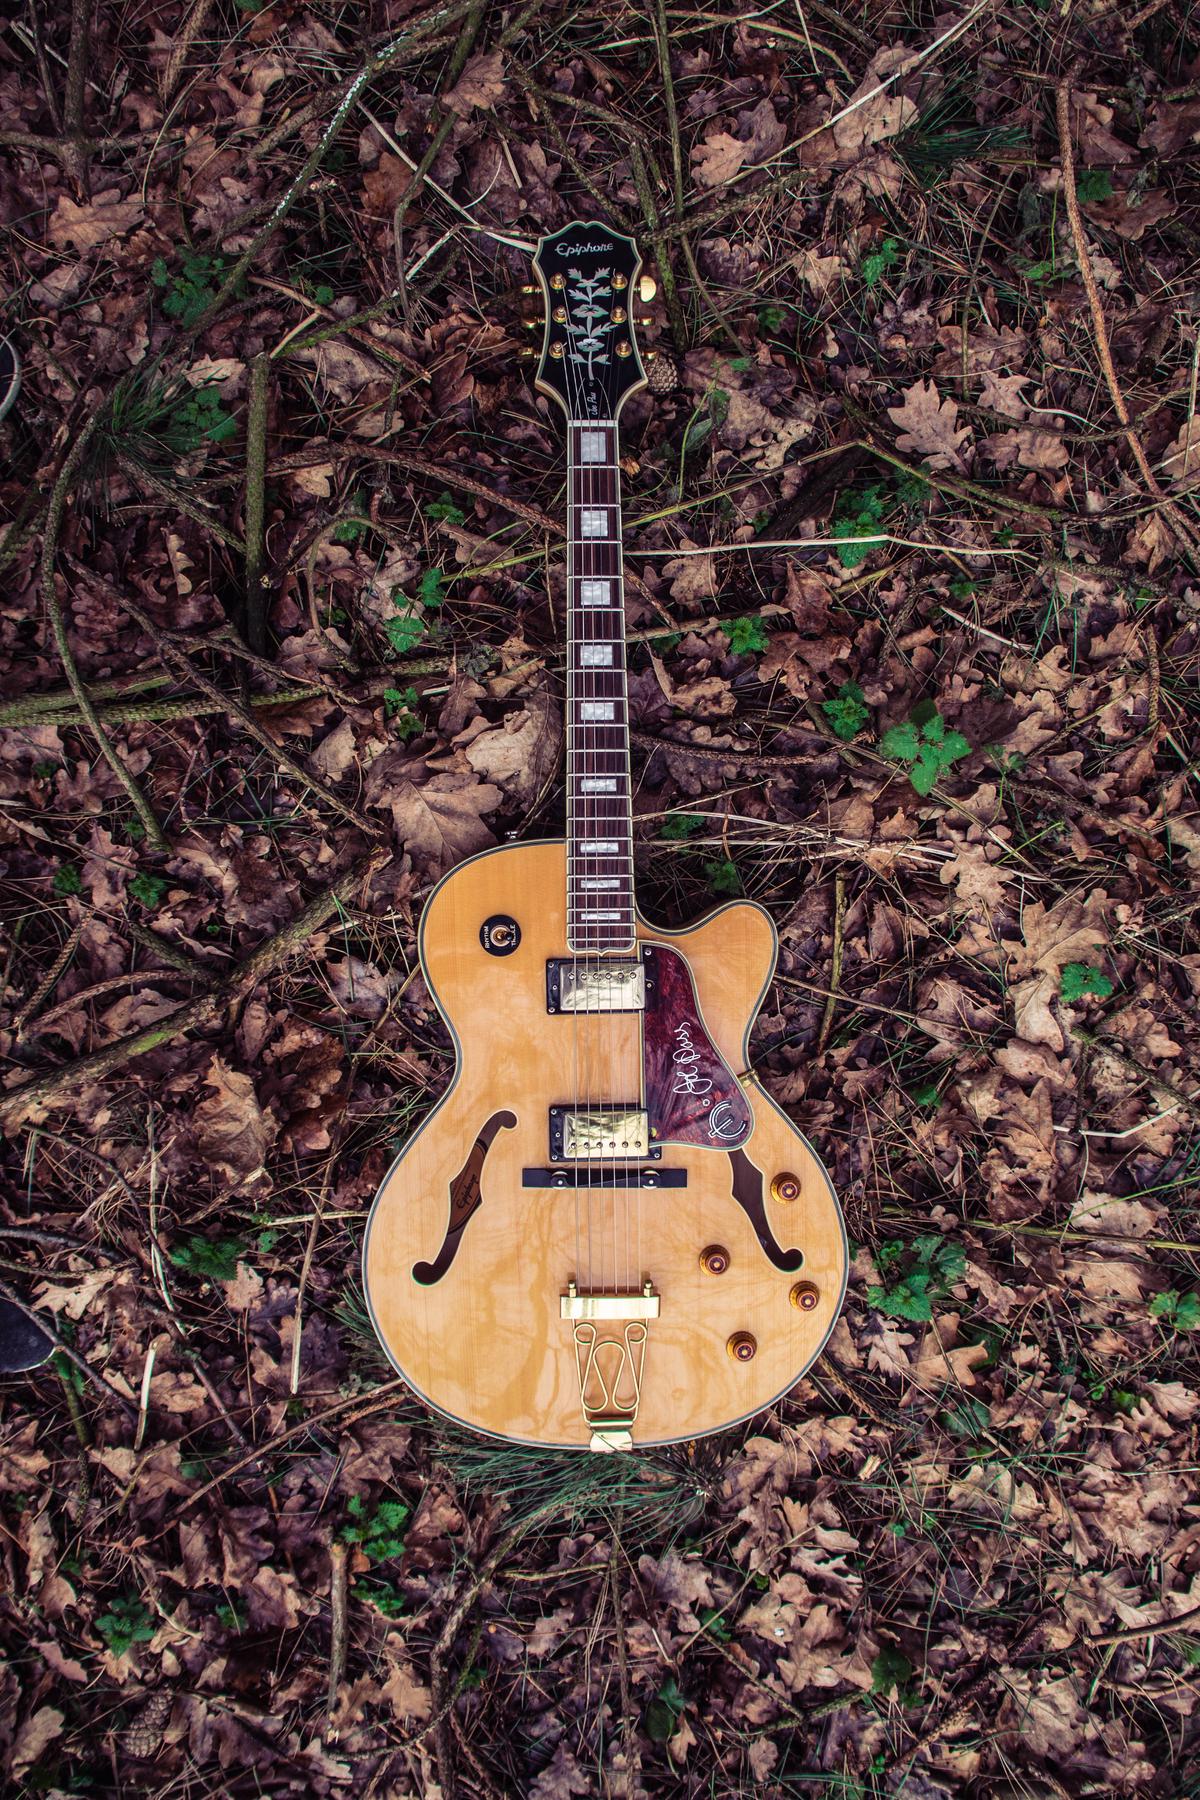 A vintage Gibson guitar resting on a guitar stand, showcasing its timeless beauty and craftsmanship.